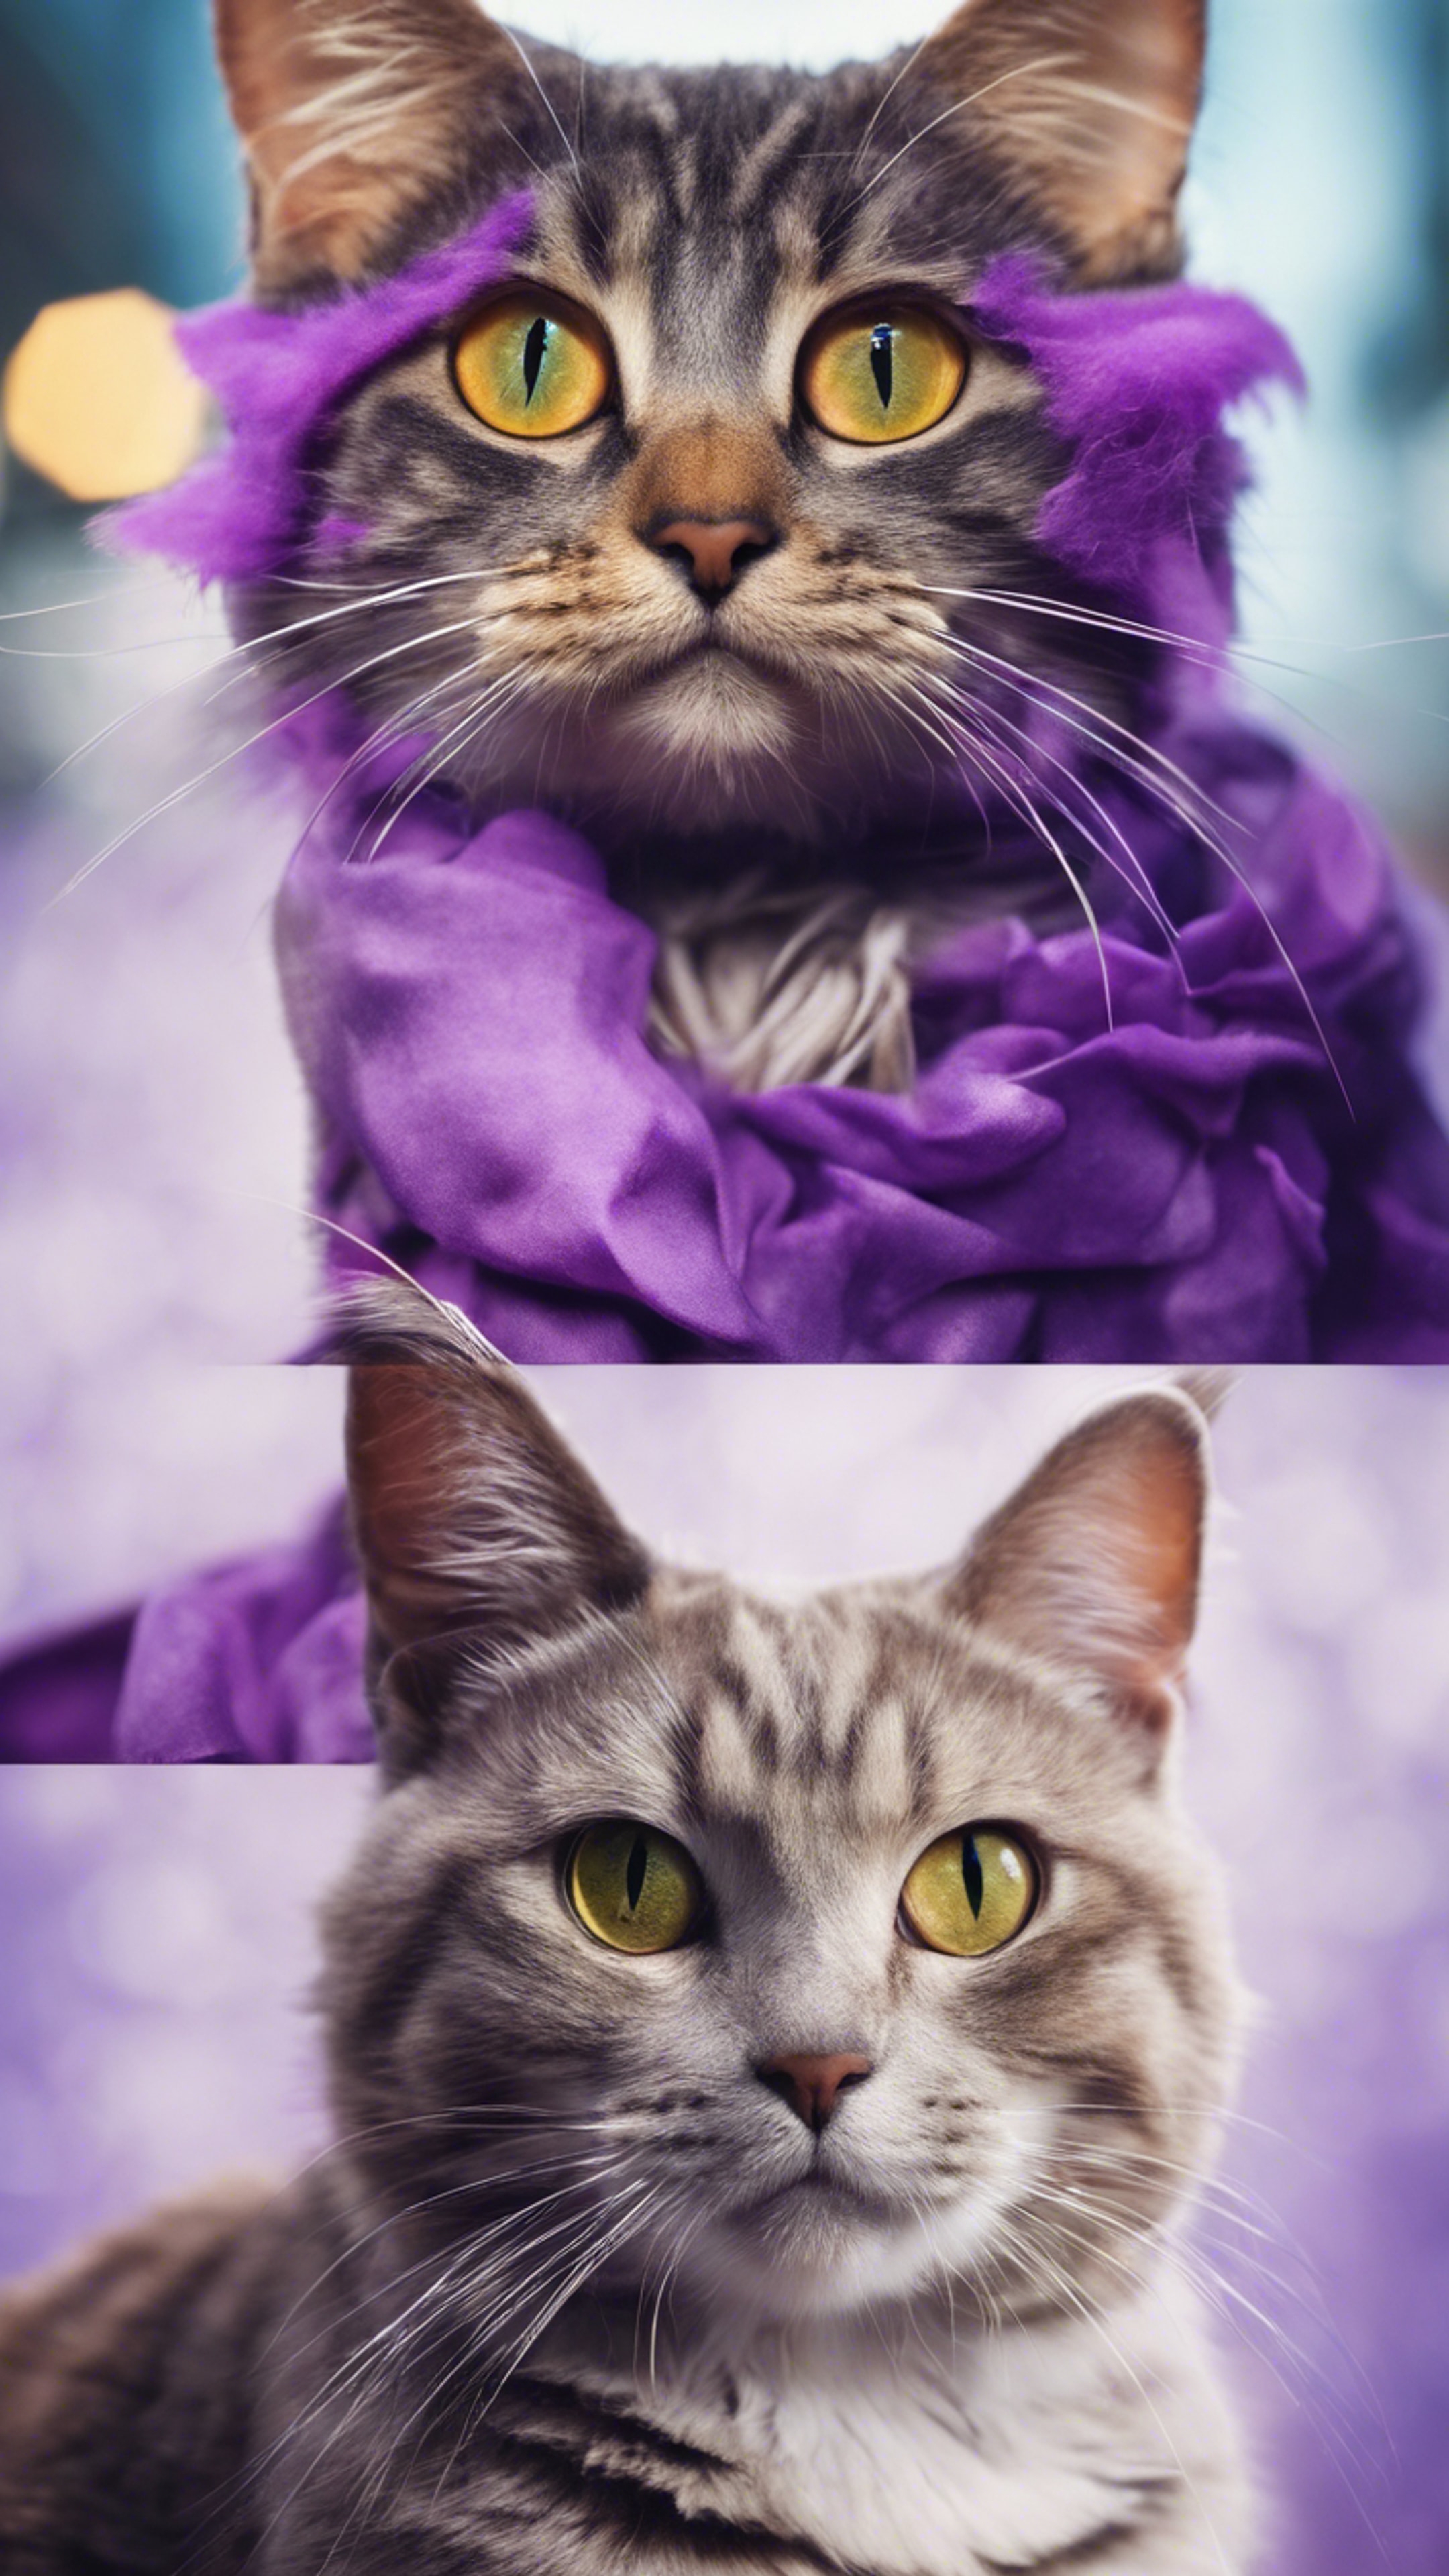 A playful collage showcasing various breeds of cats, all with unusual purple fur.壁紙[3a46628192d3463088be]